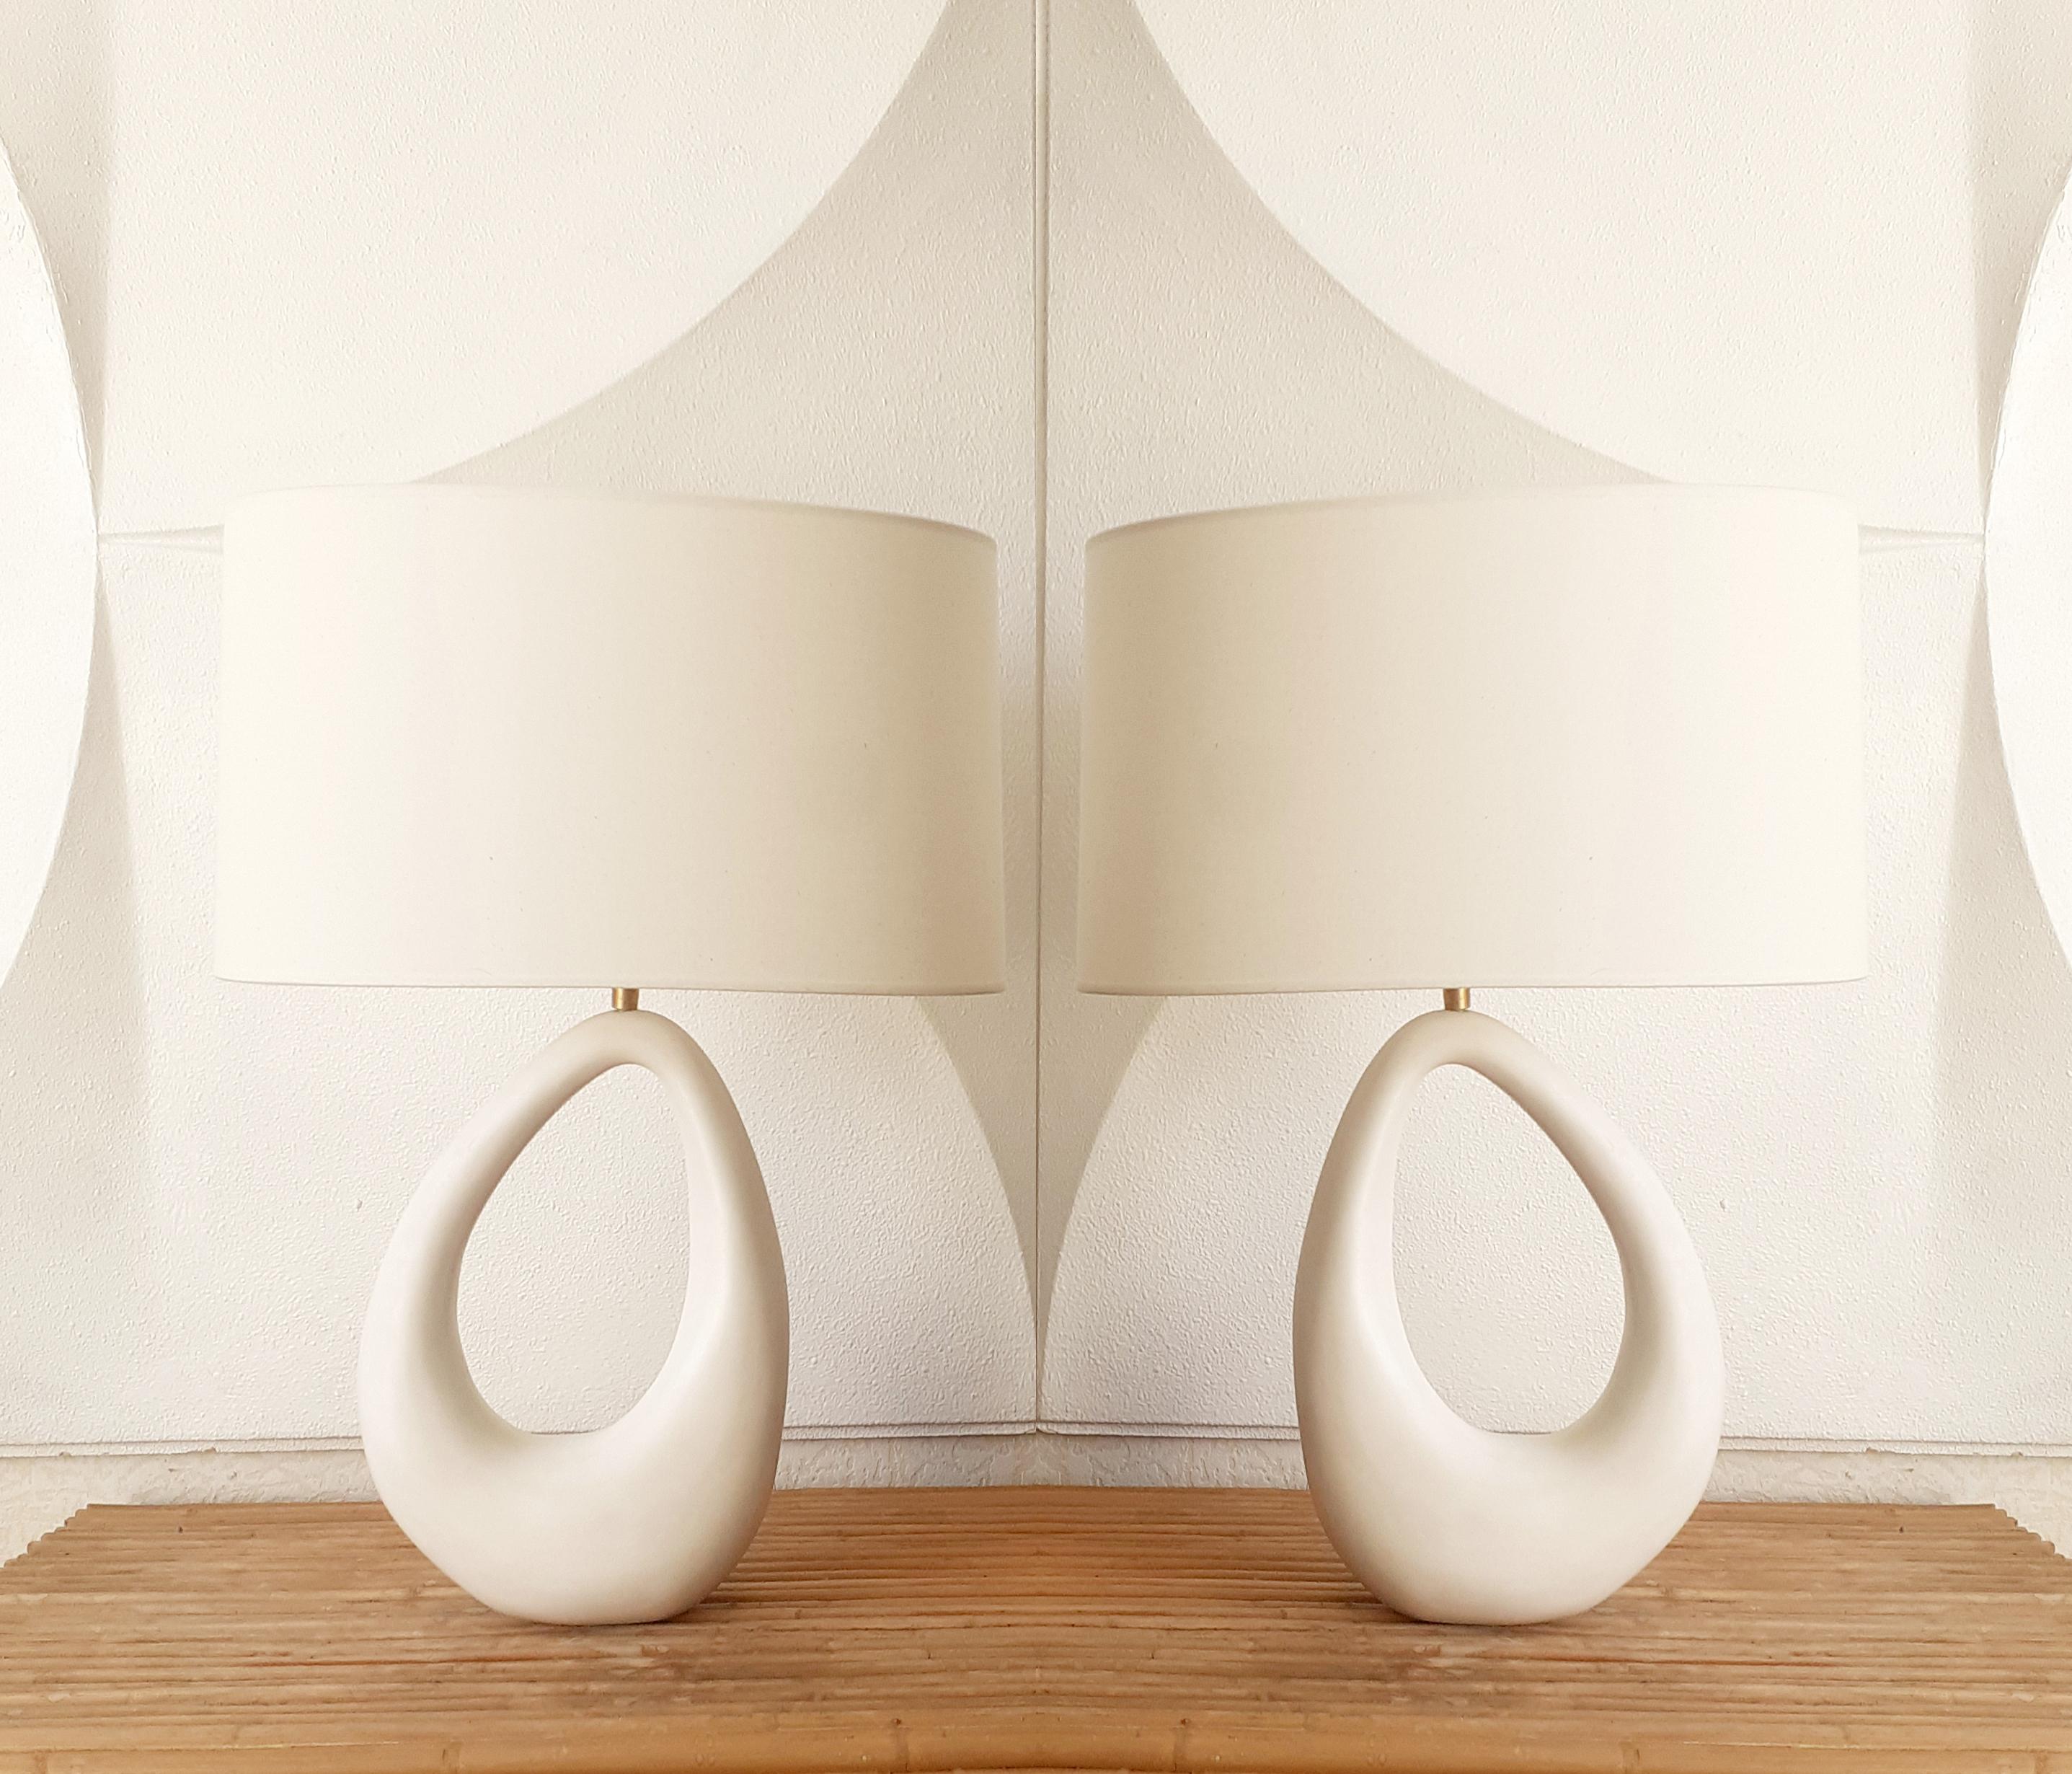 French white enameled ceramic lamps with linen shape, handmade by EF STUDIO, Paris.
Brass structure. Very decorative freeform.

Measures: Height 14.57 in. (37 cm)
Width 9.85 in. (25 cm)
Depth 3.94 in. (10 cm).